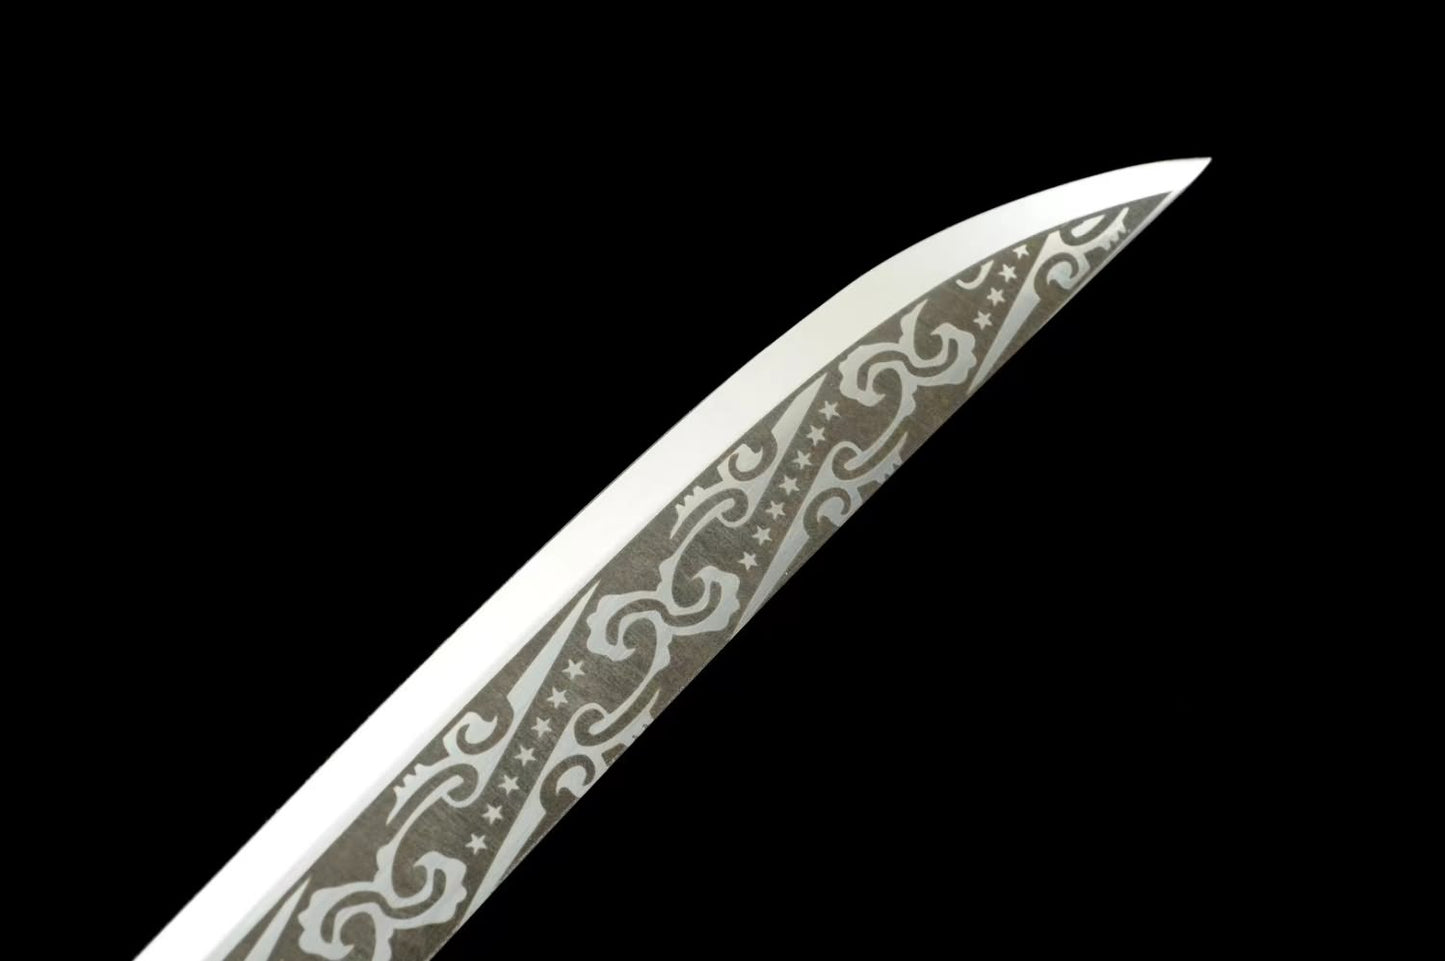 Chinese Meihua Qing dao- Traditional Handcrafted Sword with High Carbon Steel Blade